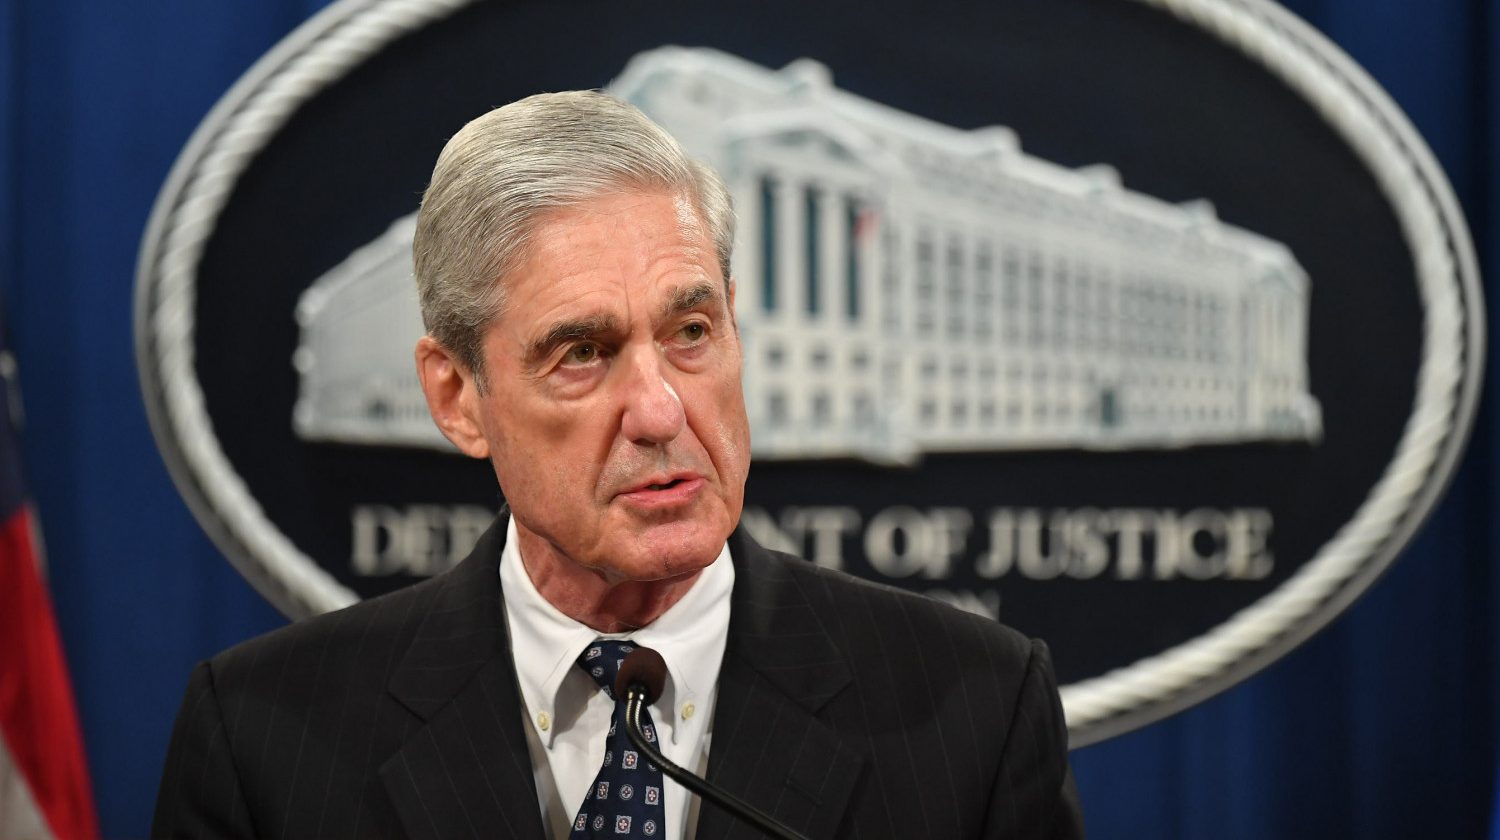 DOJ, Mueller’s Office Release Joint Statement About Special Counsel’s Comments